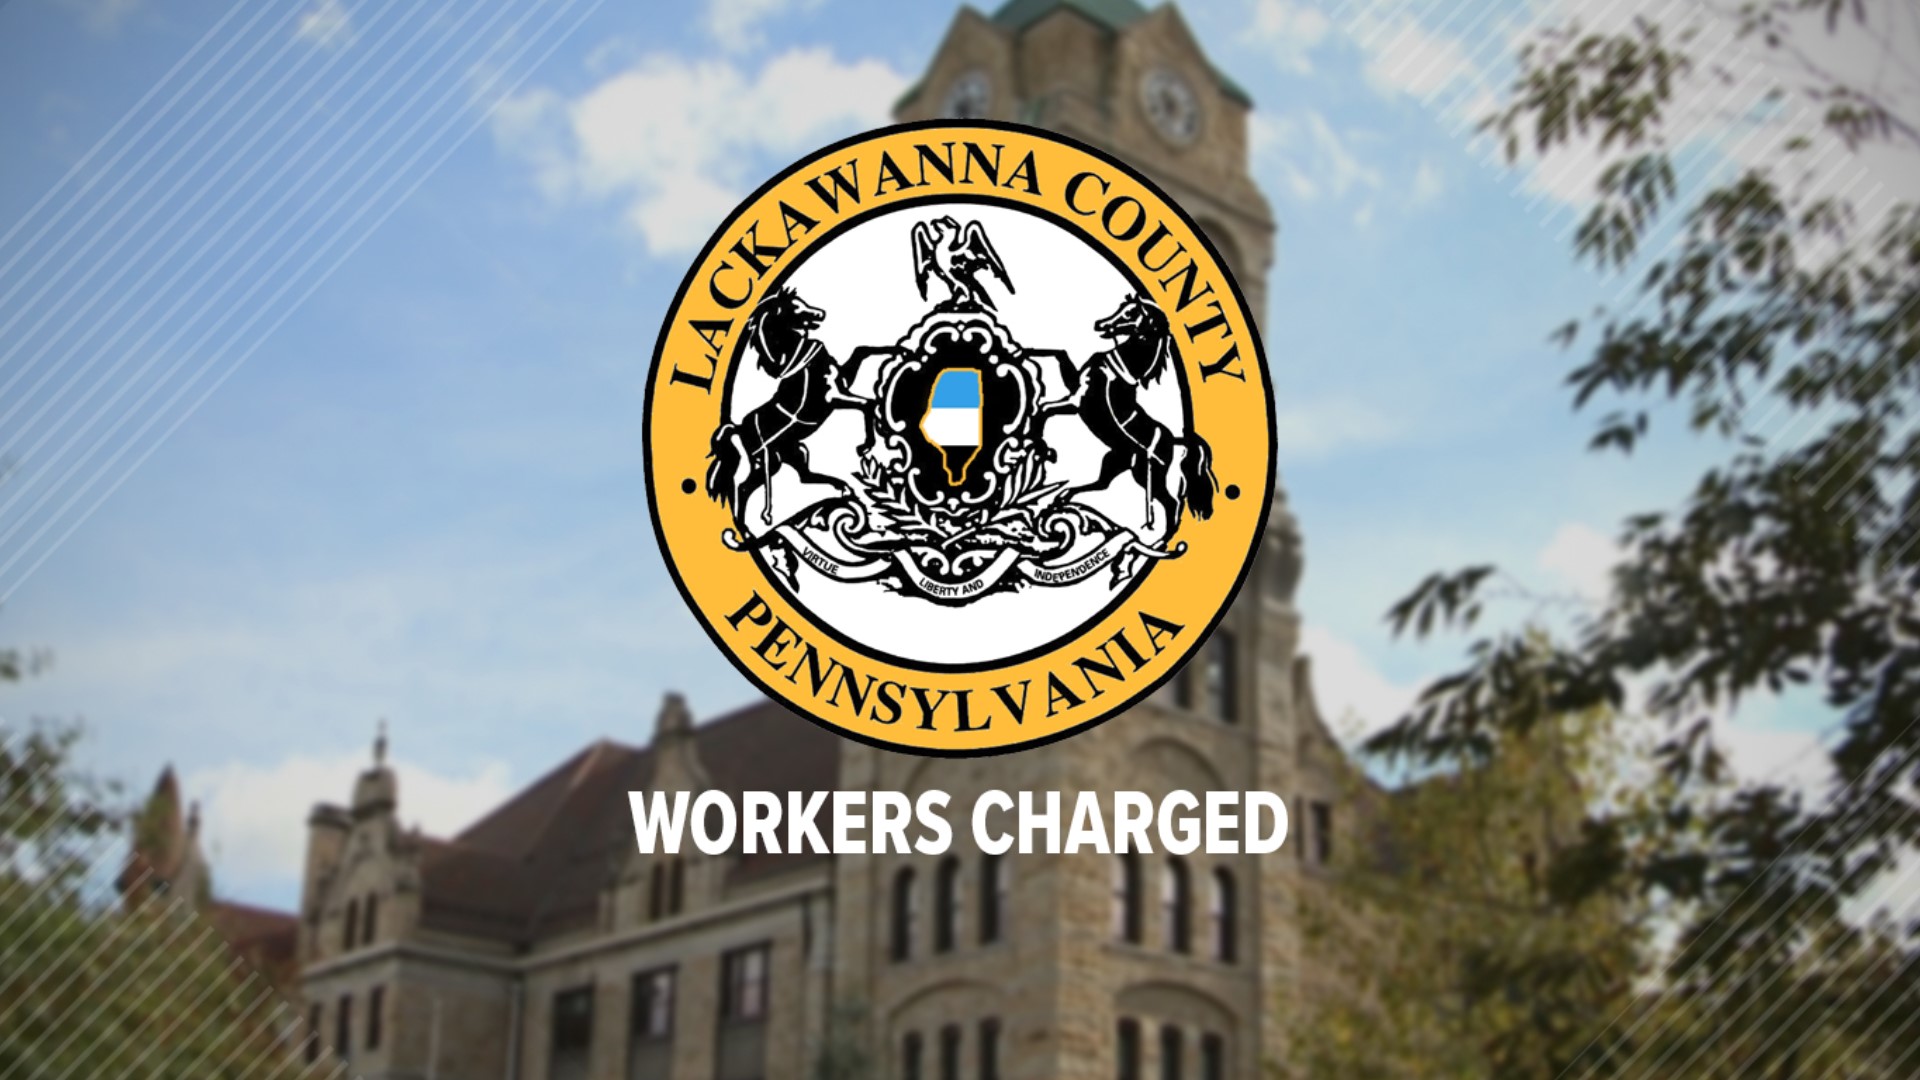 One day after the arrests of several Lackawanna County employees from the Office of Family and Youth Services, neighbors and county officials are speaking out.